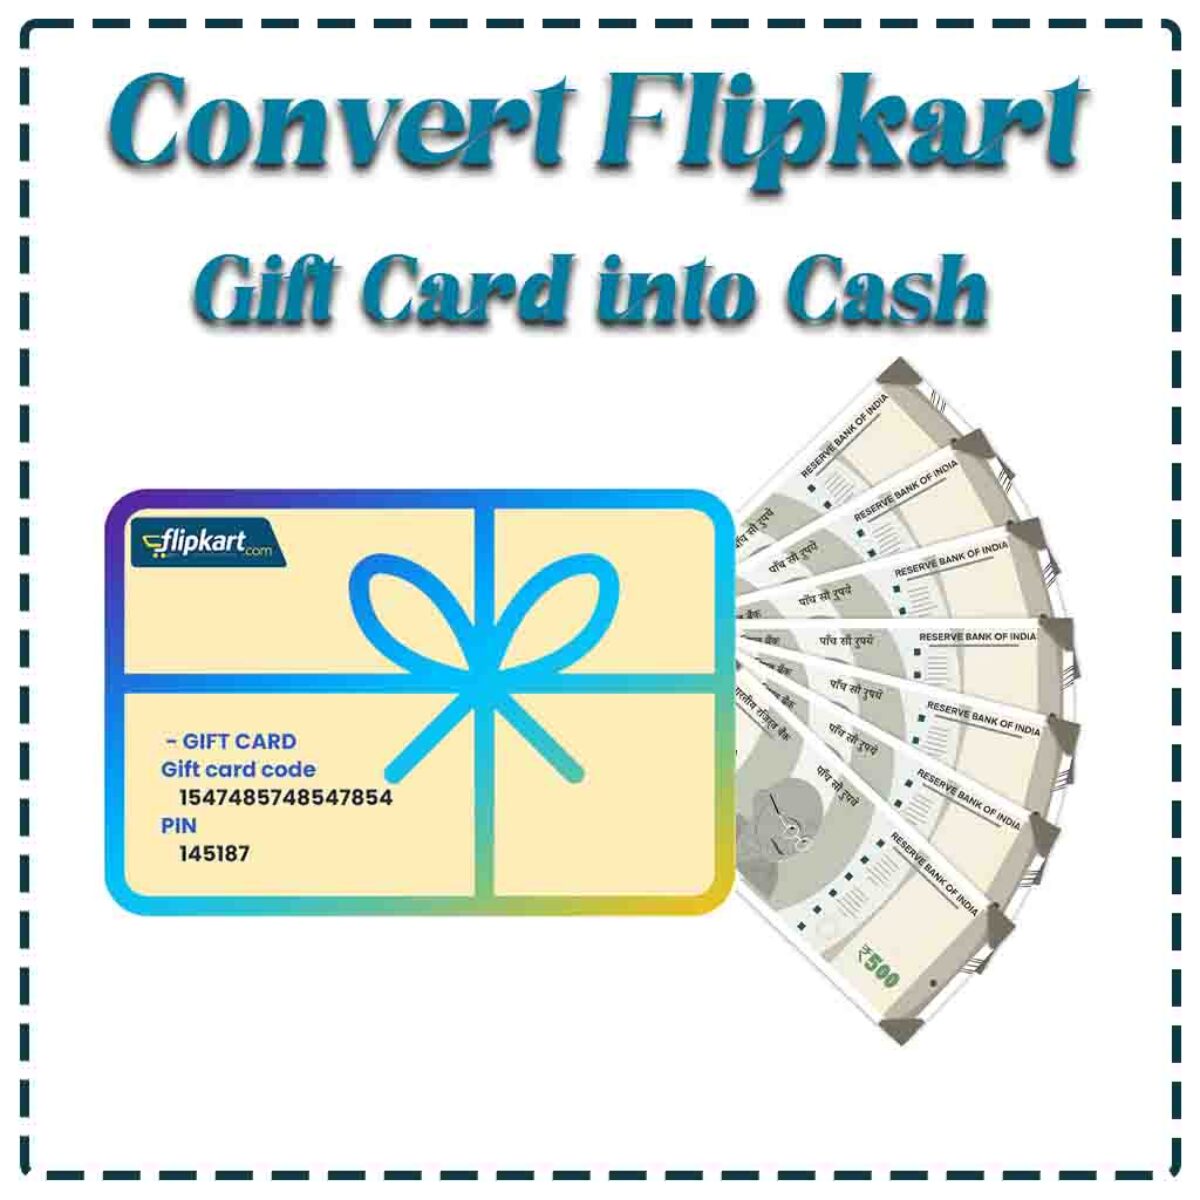 Turn Gift Cards Into Real Cash Now with Cash4GiftCardsAmerica! :  u/cashforgift